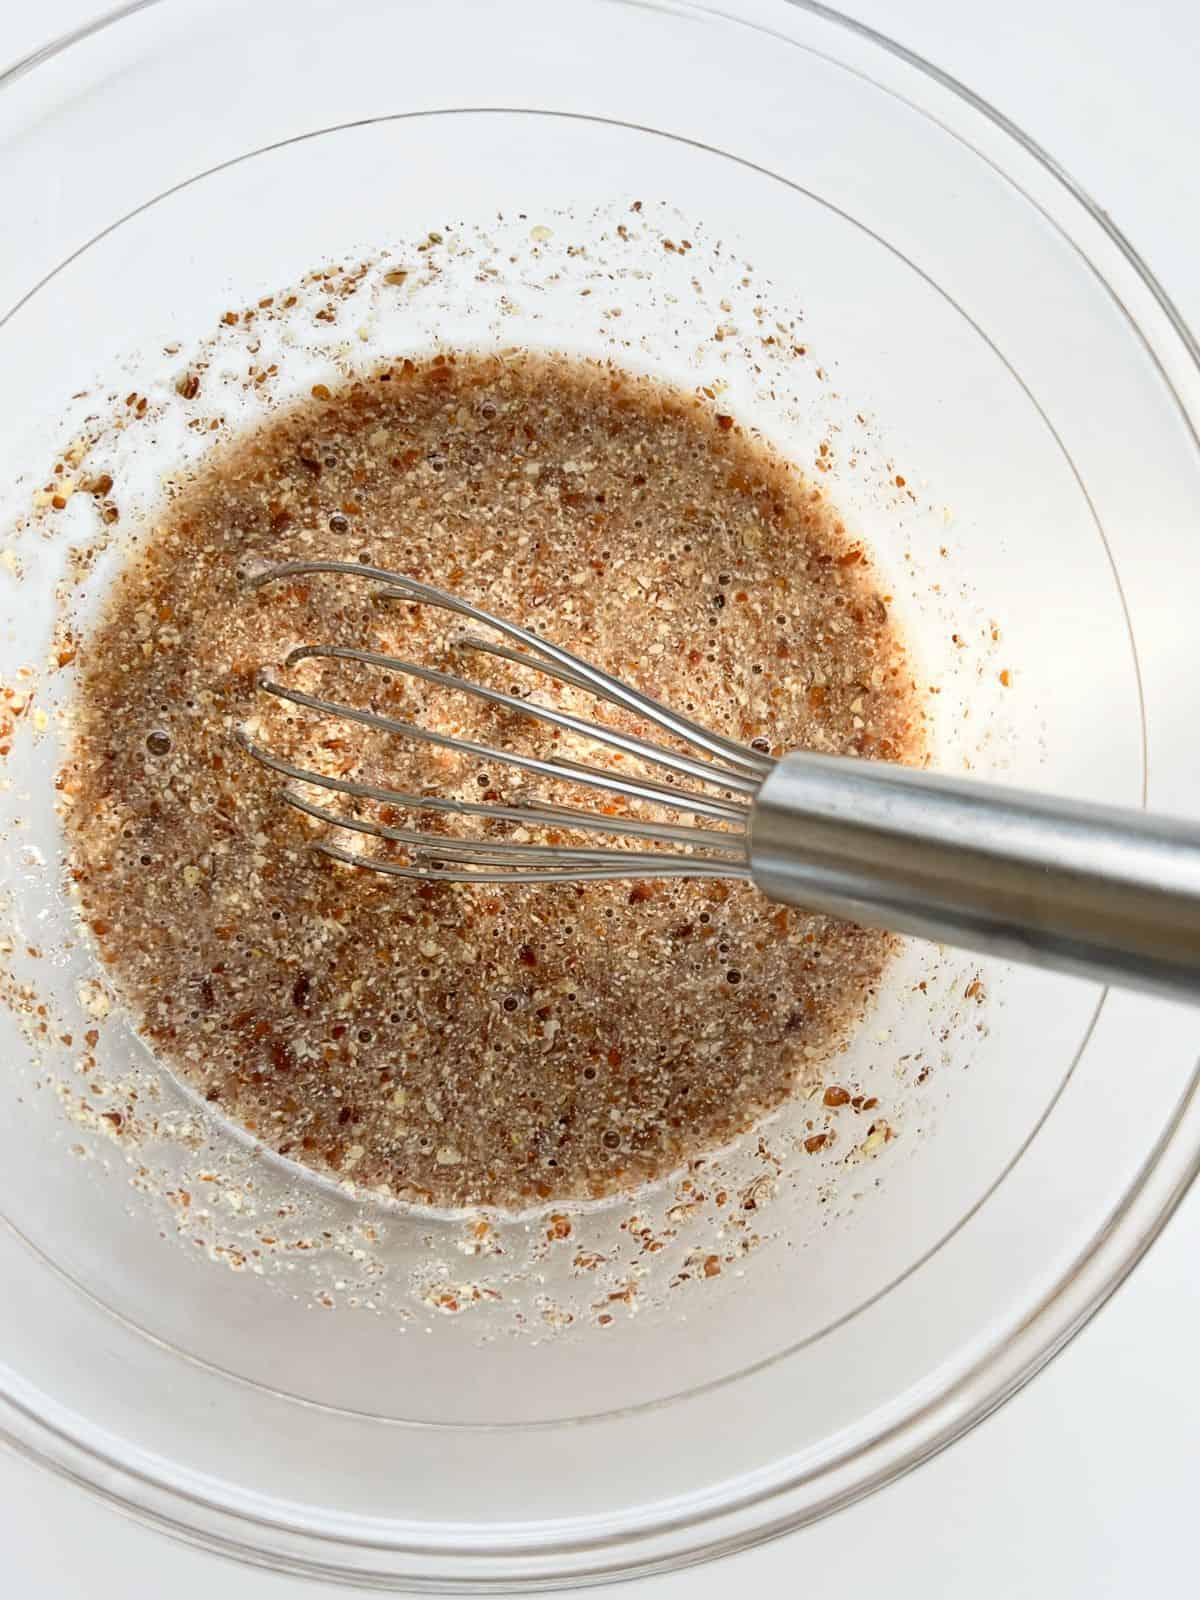 An image of ground flaxseed and water mixed together in a glass bowl with a silver whisk.